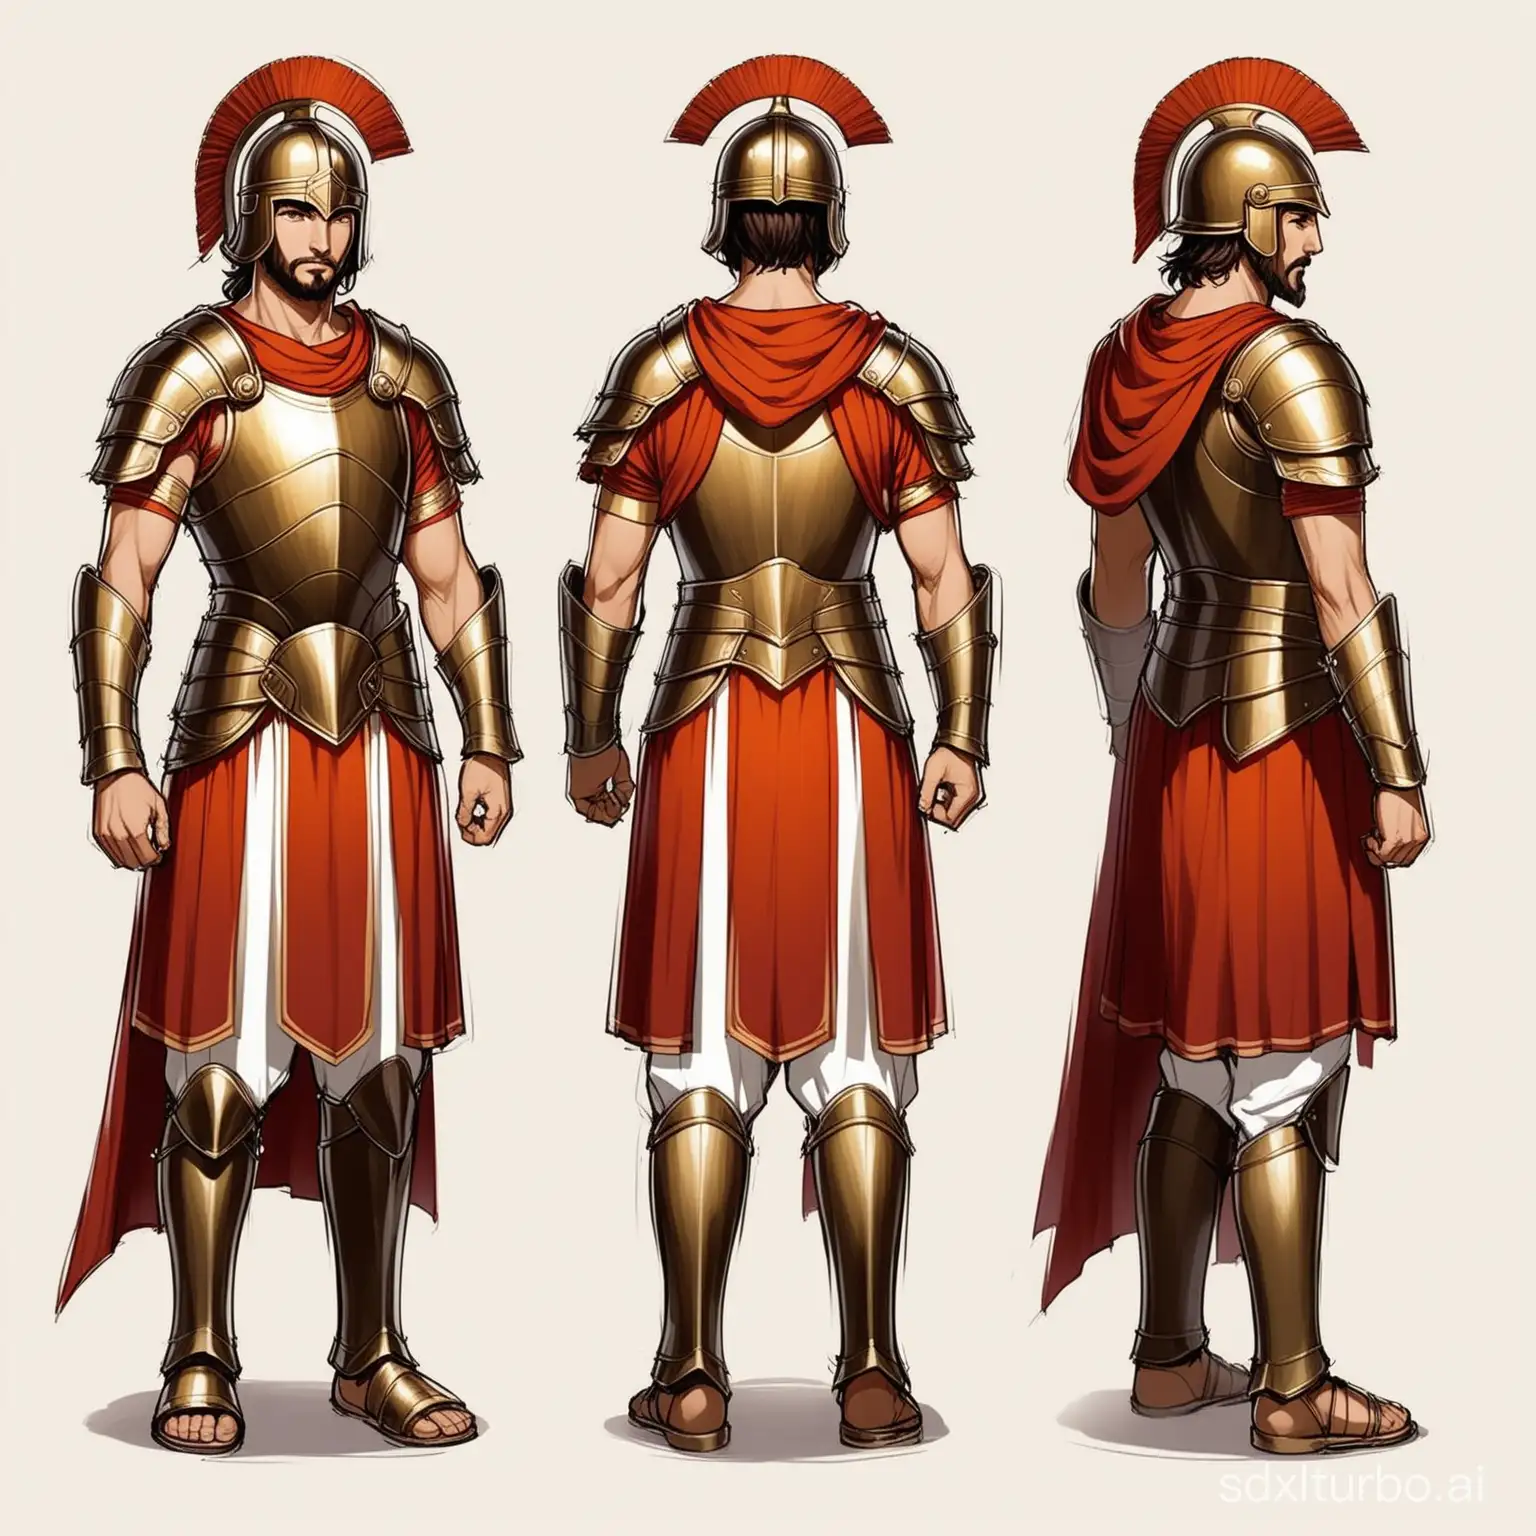   Character Design Description

#### Background Story
- *Name*: TBD
- *Age*: 15
- *Origin*: North Africa, during the time of the Carthaginian Empire
- *Motivation*: Seeking revenge on the Romans for killing his farmer parents during an attack on their dynasty.
  
#### Personality
- *Traits*: Young, brave, innocent, revolutionary, and rebellious.
- *Characteristics*: Curious, determined, and driven by a strong sense of justice and revenge.

#### Physical Traits
- *Helmet*: Wearing a Carthaginian military helmet, symbolizing his allegiance and warrior spirit.
- *Body Armor*: A body armor that appears oversized for his young frame, showcasing his determination to become a warrior despite his age.
- *Clothing*: Simple and practical clothing underneath the armor, reflecting his humble origins as a farmer's son.
  
#### Design Elements
- *Body Proportions*: The character should have a lean and agile build, with subtle indications of his young age.
- *Facial Features*: Expressive eyes that convey determination and innocence, along with a youthful face that shows signs of determination.
  
#### Color Palette
- *Armor*: Earthy tones like bronze and dark leather to reflect the materials available during the Carthaginian era.
- *Clothing*: Neutral tones like beige or brown for the underclothes to complement the armor.
- *Helmet*: Metallic shades with bronze or gold accents to highlight the helmet's importance.
  